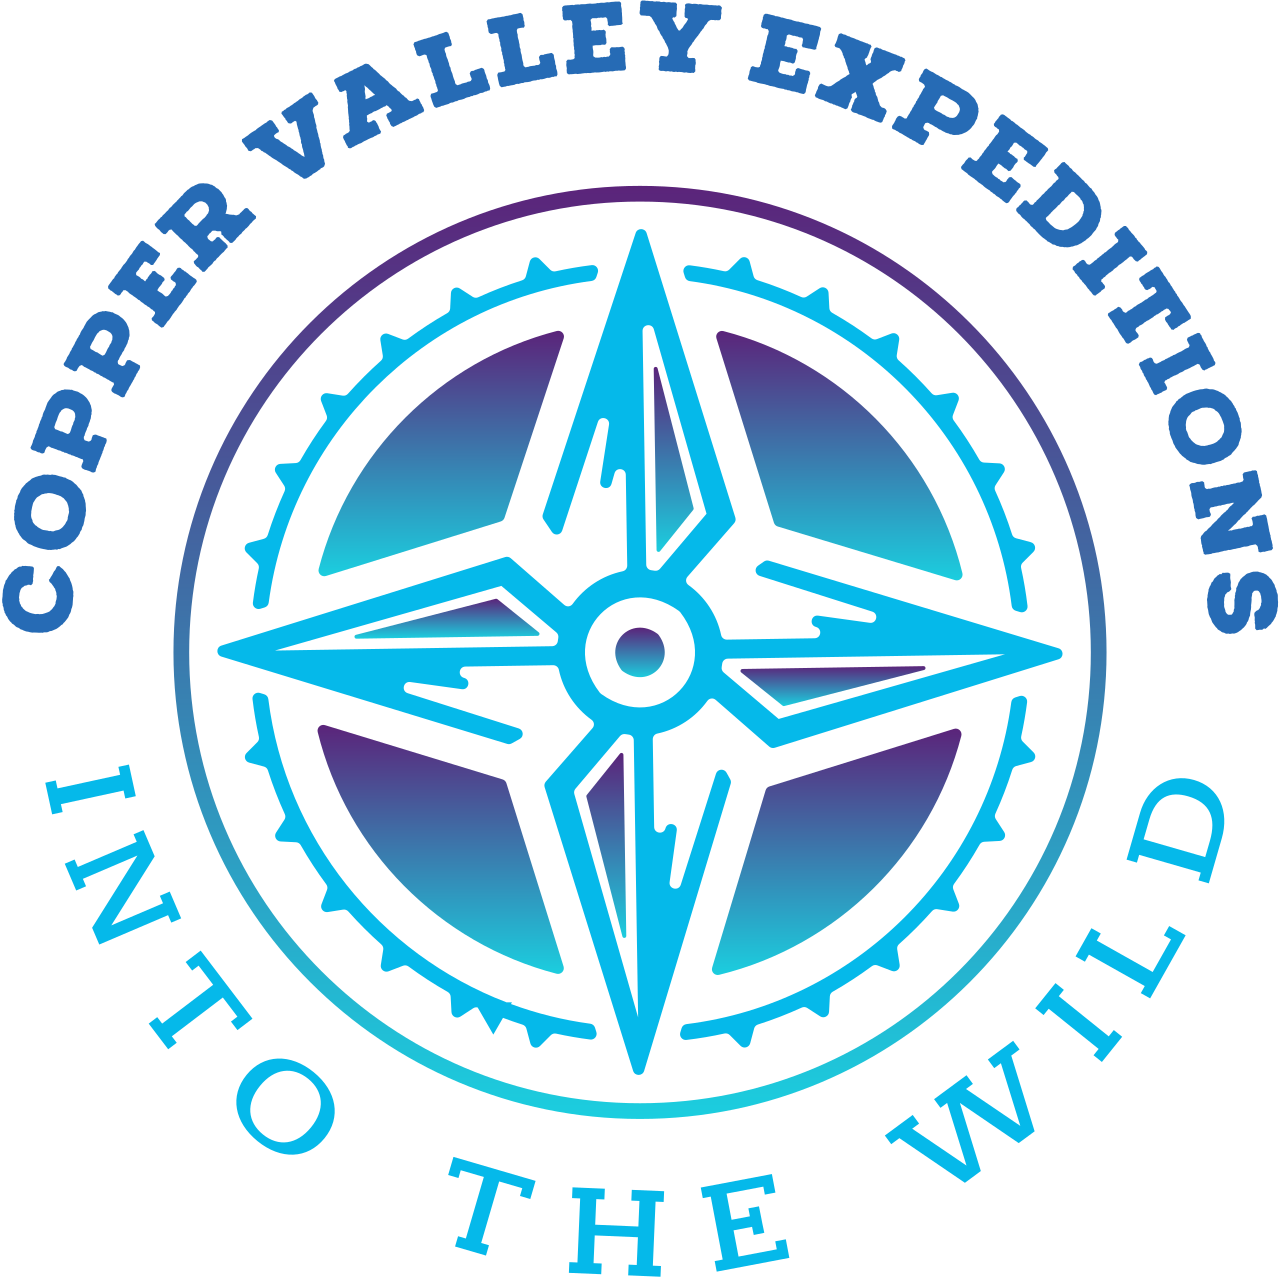 COPPER VALLEY EXPEDITIONS's logo